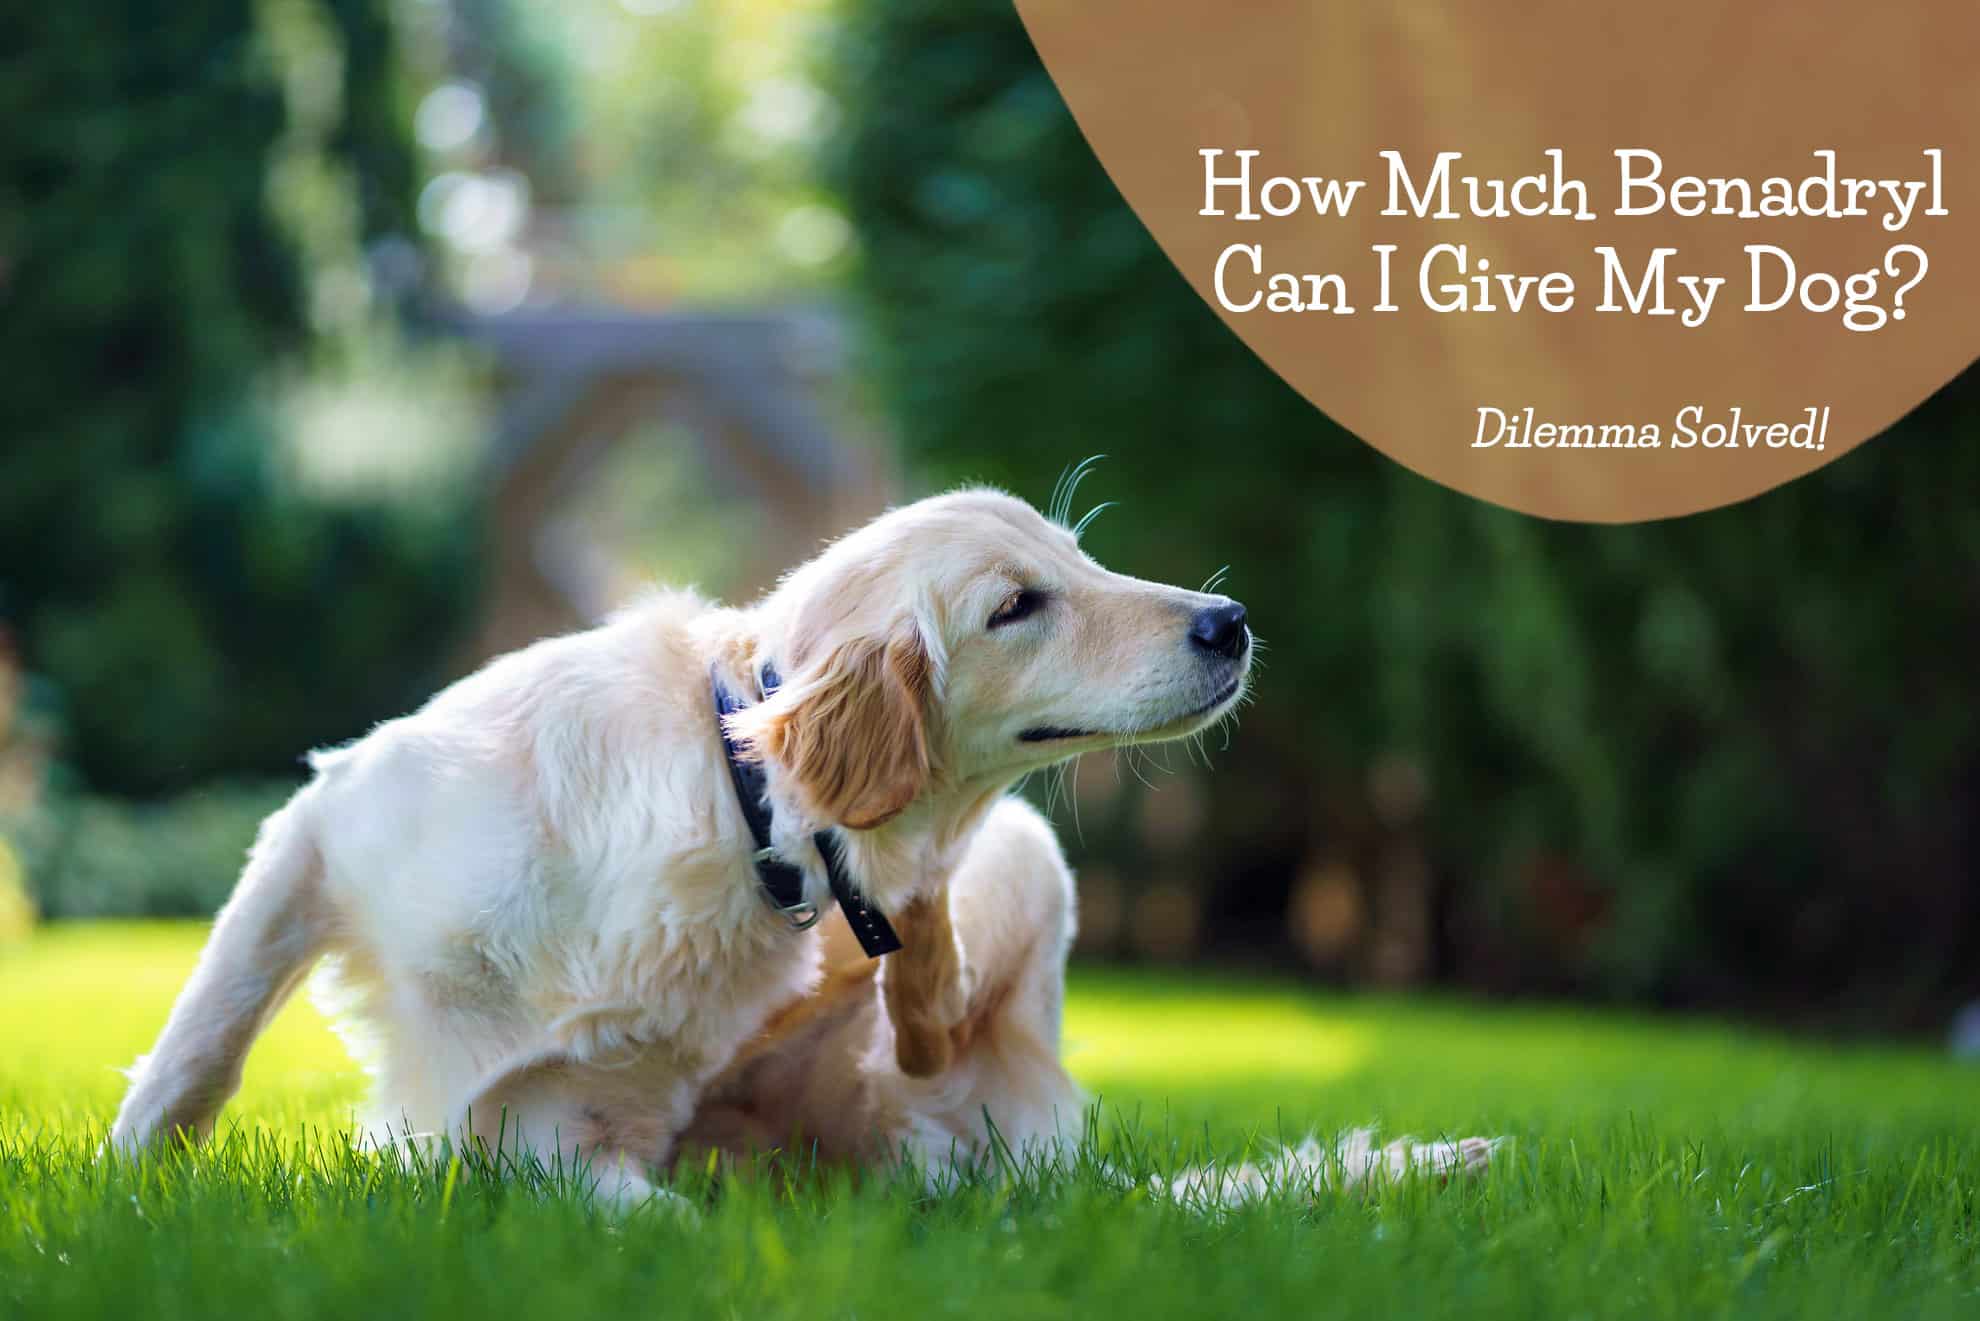 How Much Benadryl Can I Give My Dog? The Dilemma Is Solved